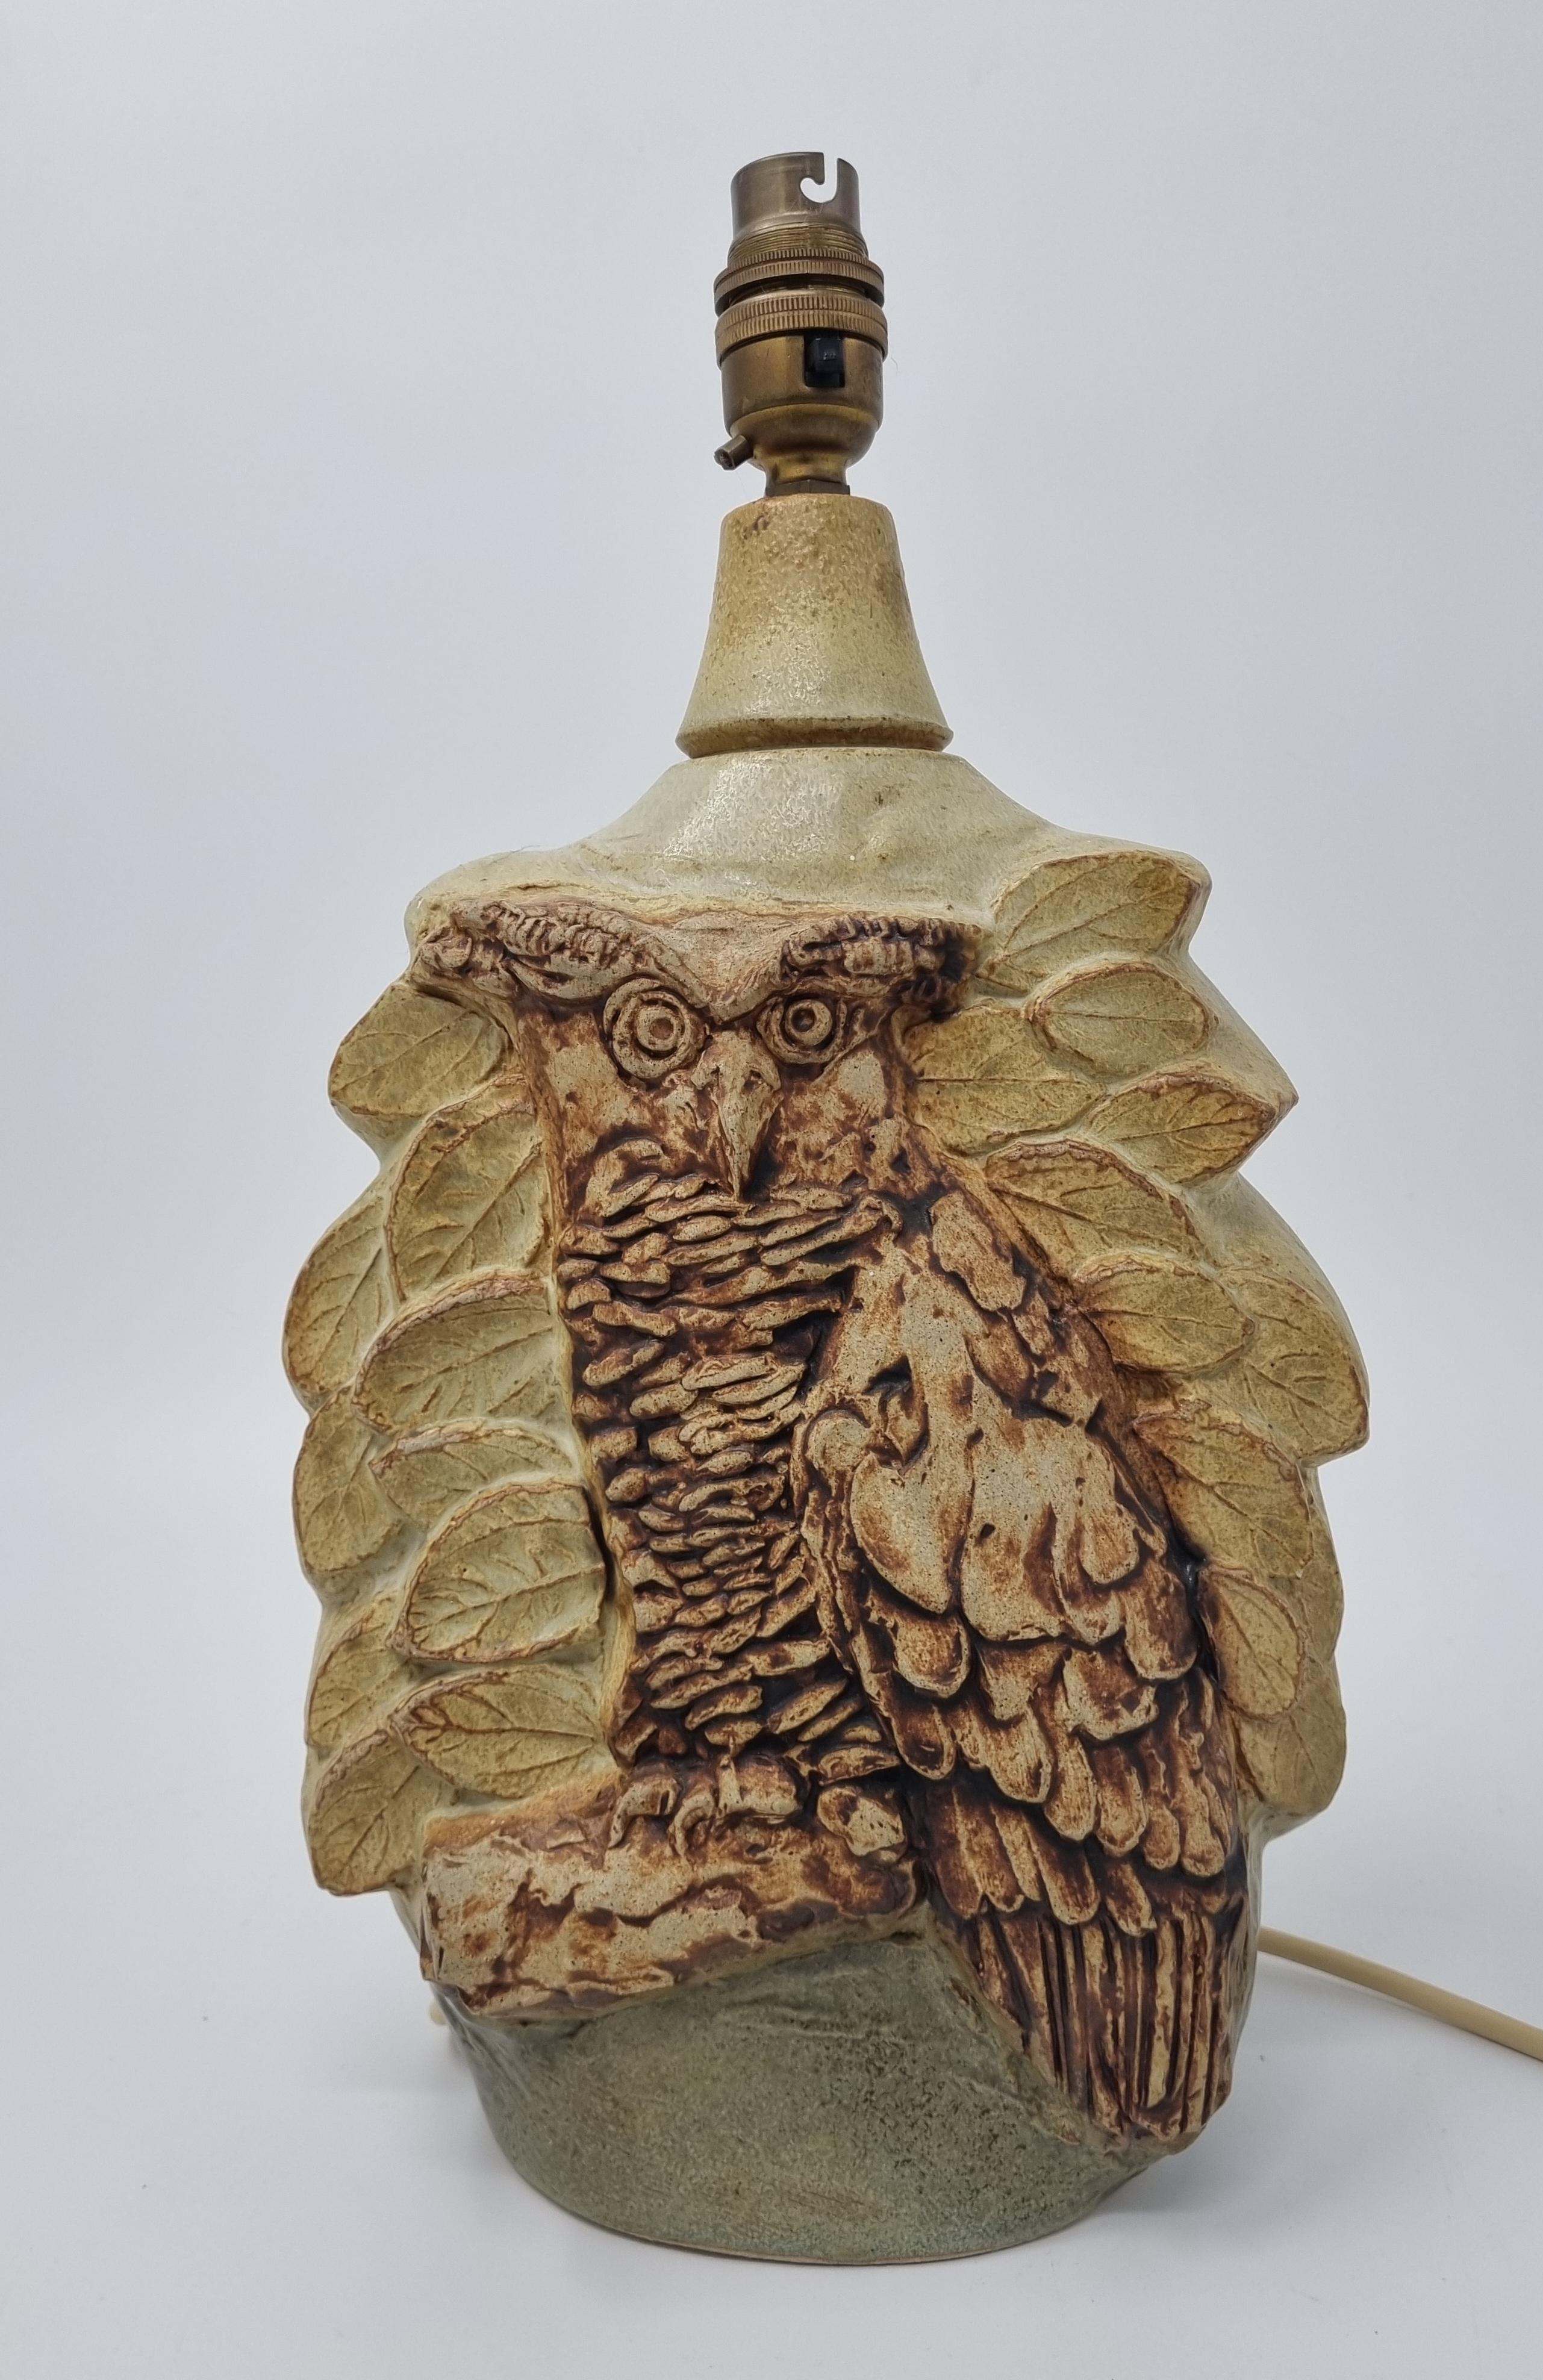 Bernard Rooke Studio Pottery Brutalist Style Owl Lamp is a beautifully sculpted lamp made by the renowned British artist and potter, Bernard Rooke. It serves as a lovely example of his work.

Bernard Rooke's artistic journey began at the prestigious